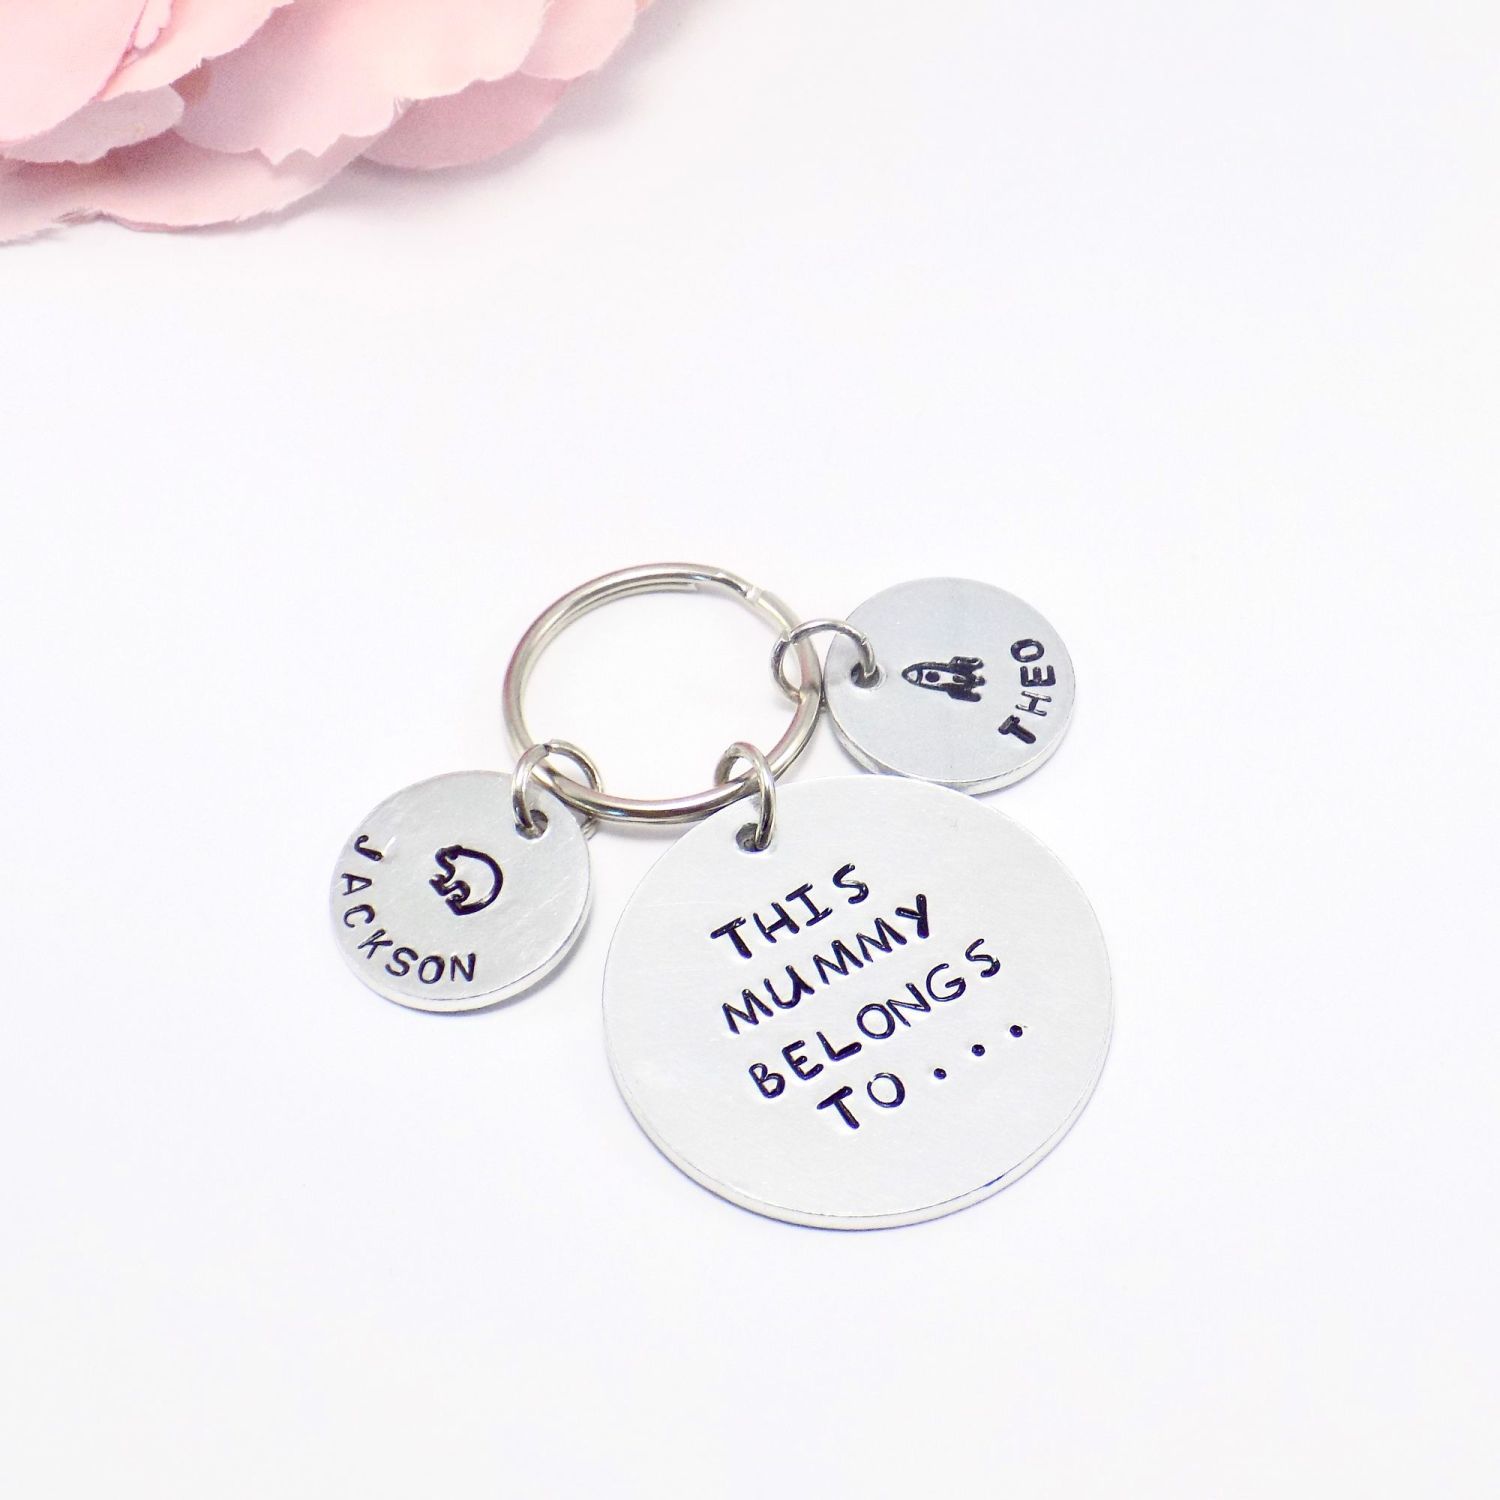 Tokens on a keychain stamped with childrens names and symbols